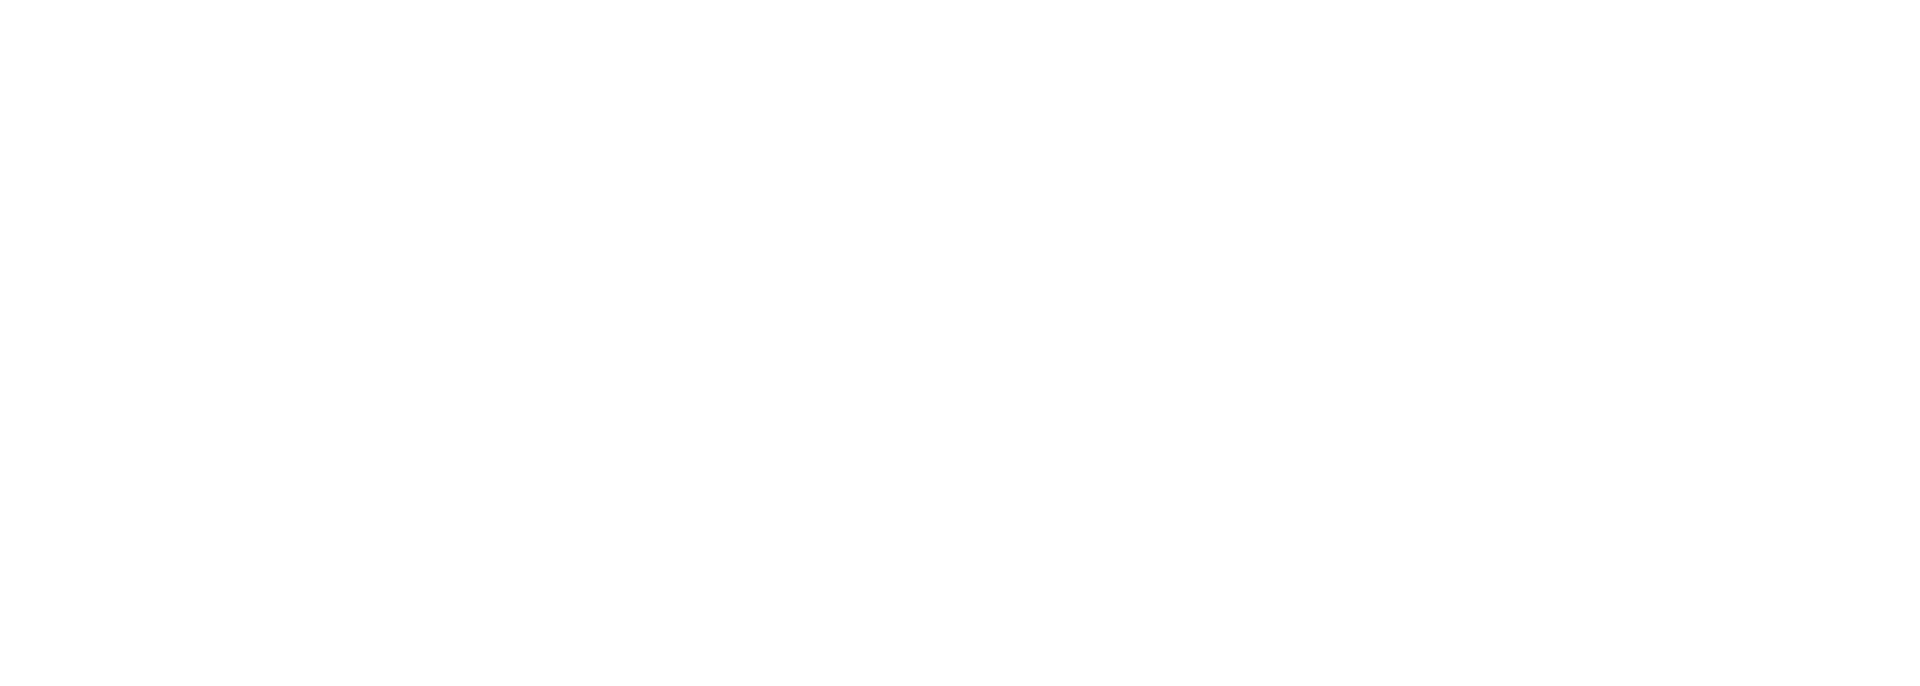 Your time is your own. Work at your own pace, on your own time and set up your own schedule. 